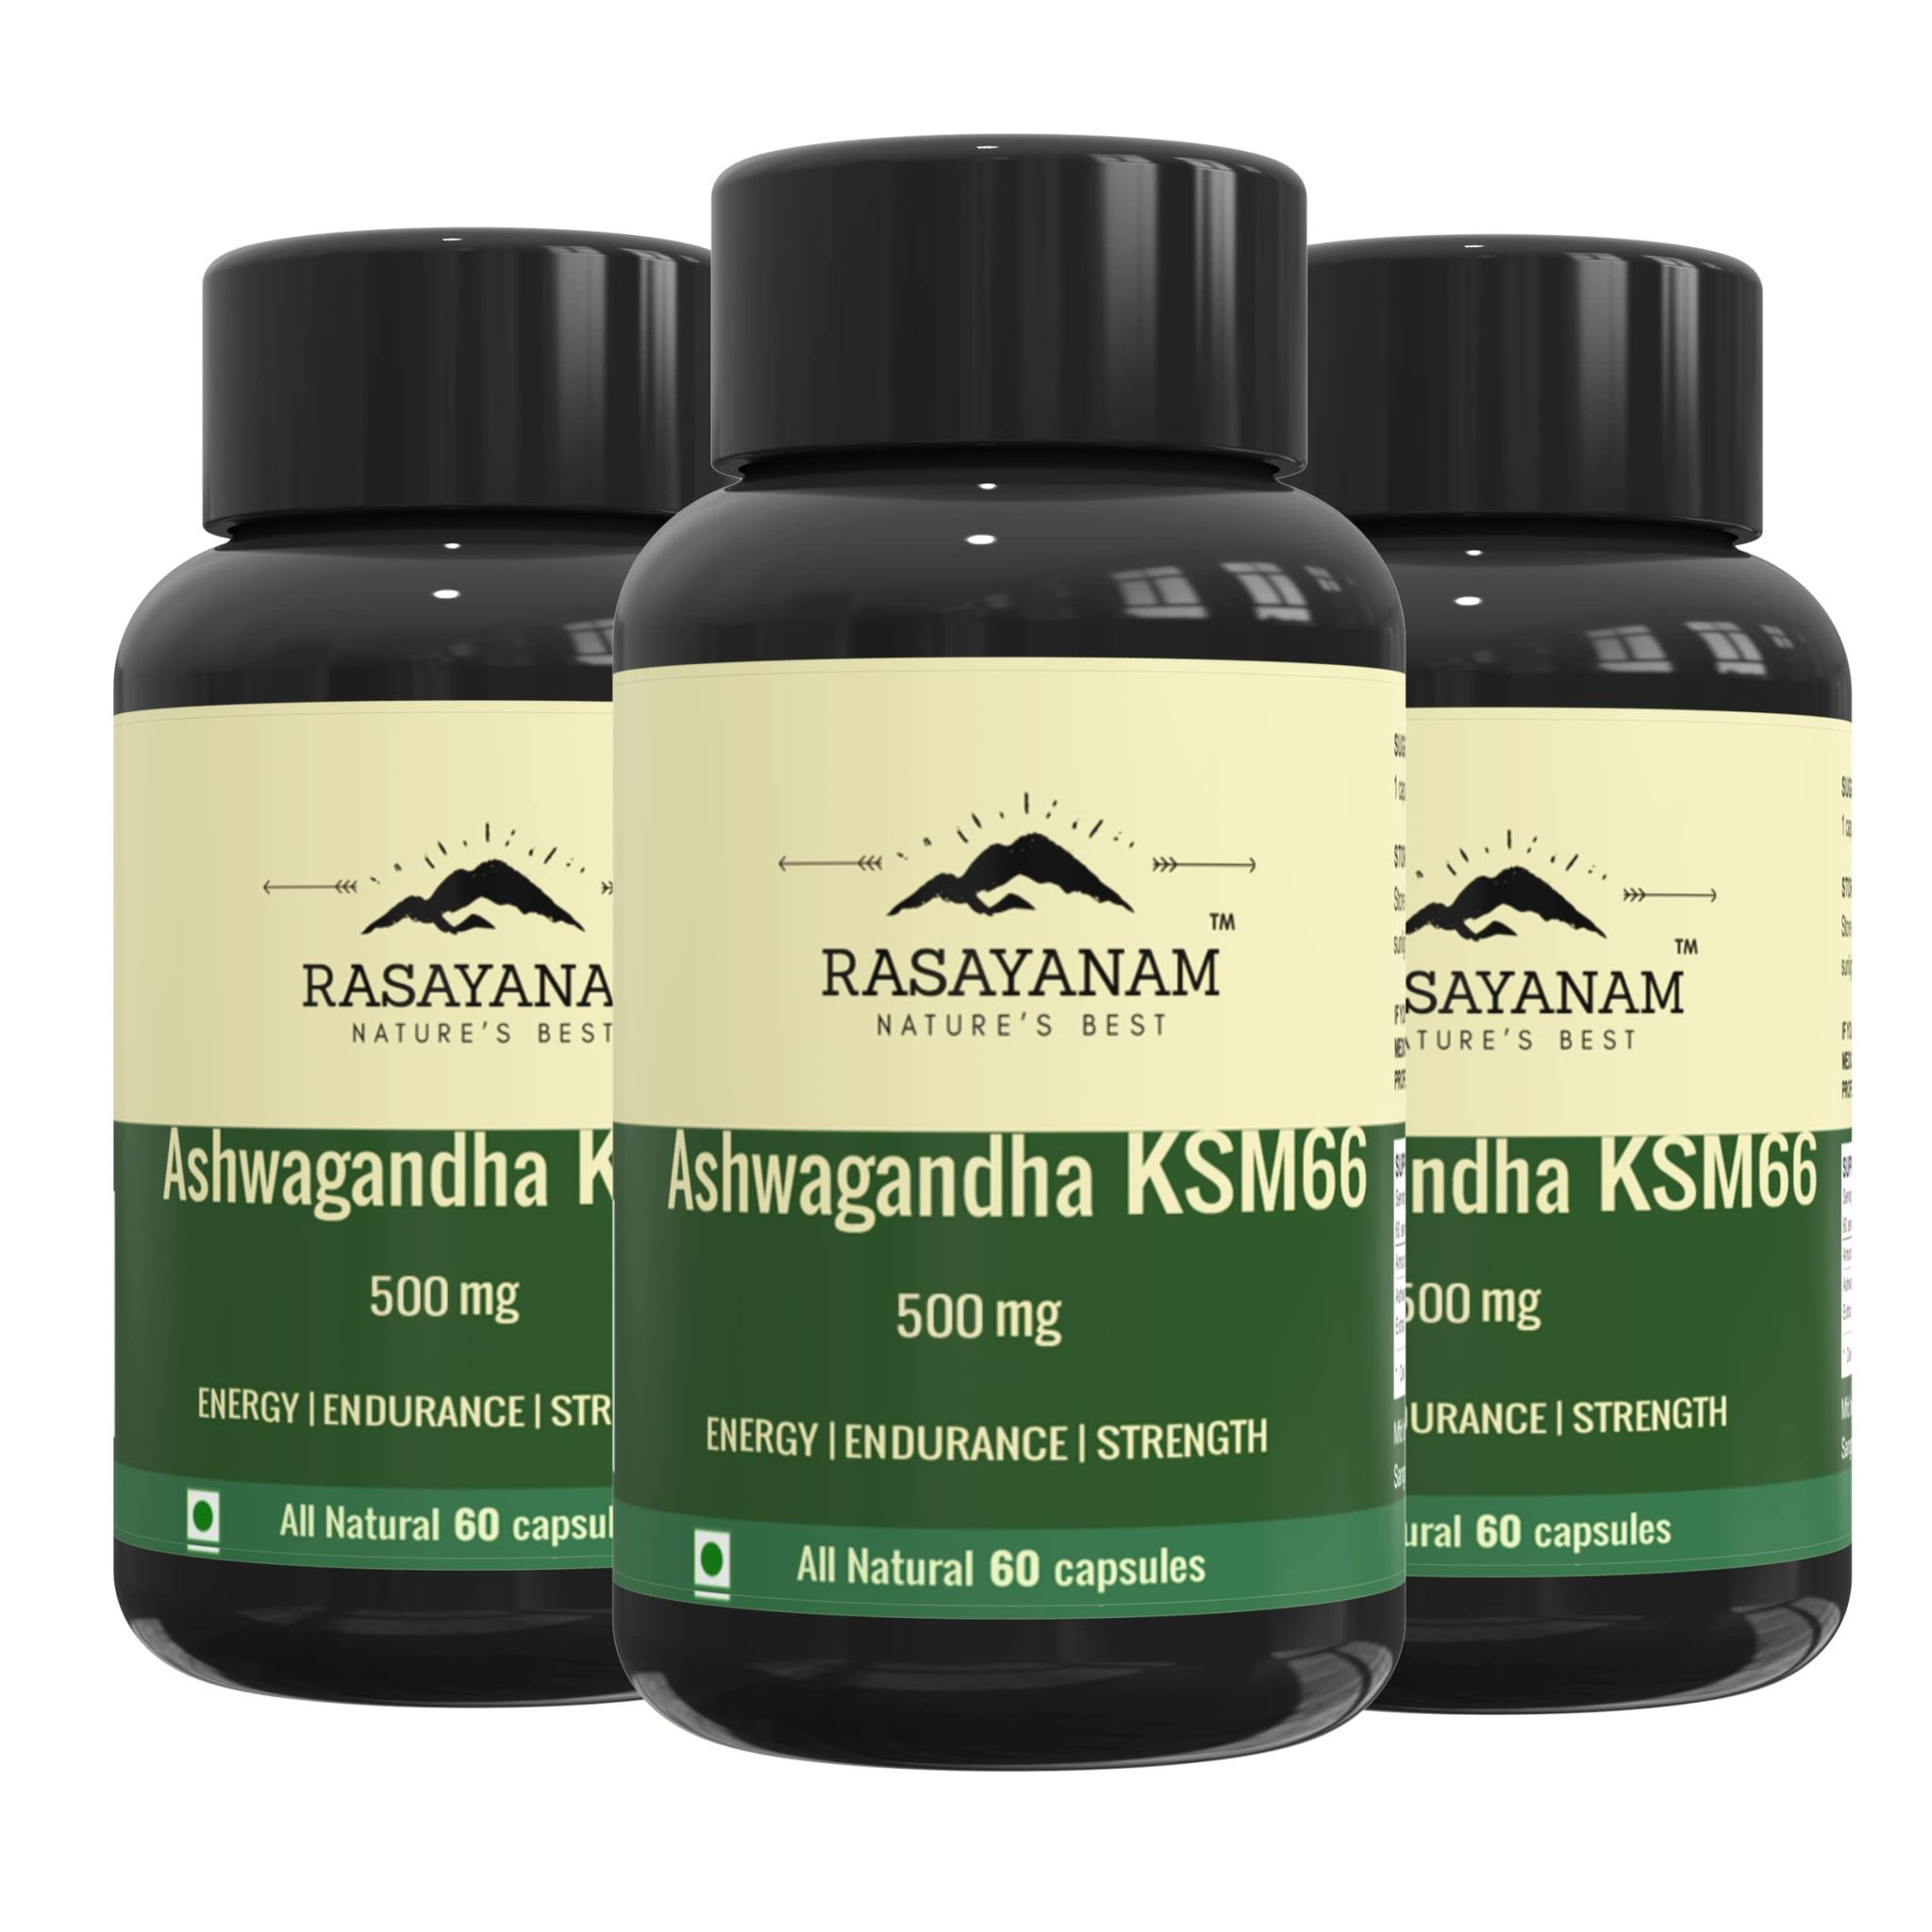 Rasayanam Ashwagandha KSM-66 (500 mg) PACK OF 3 | Extra Strength Natural Formulation | Support strength & energy | Withania Somnifera Extract